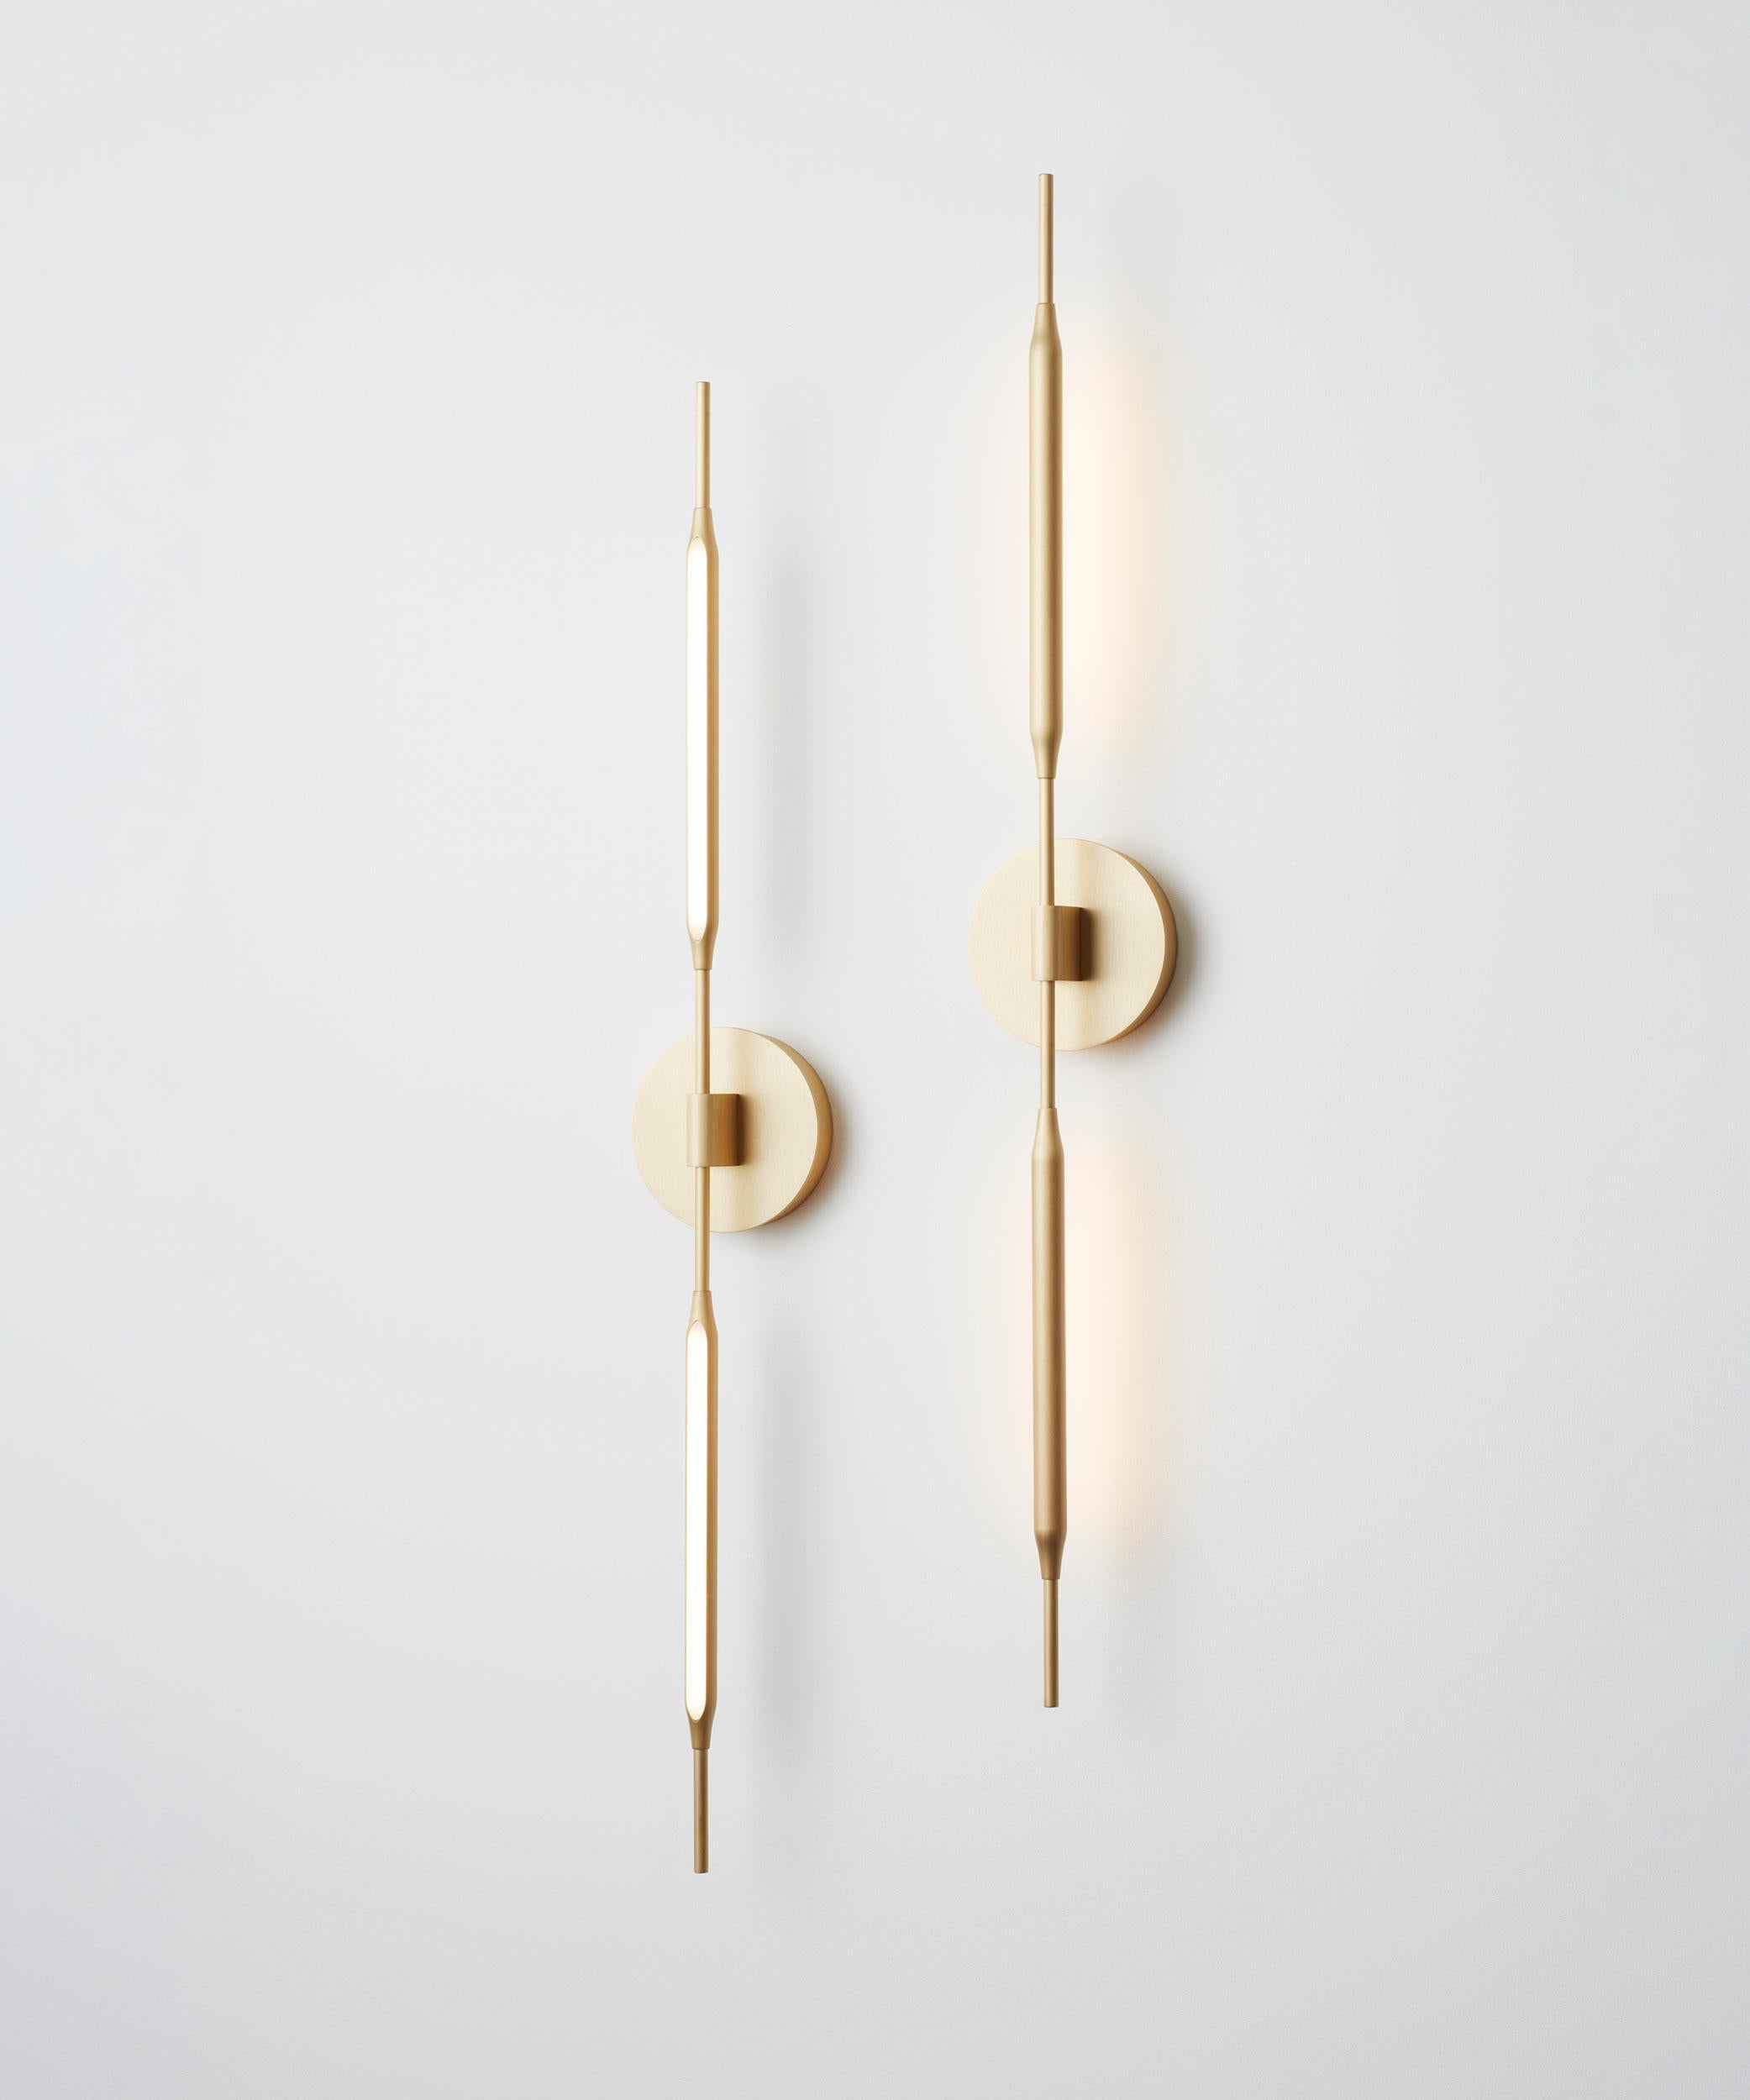 Modern Reed Wall Light in Polished Nickel Finish, UL Listed For Sale